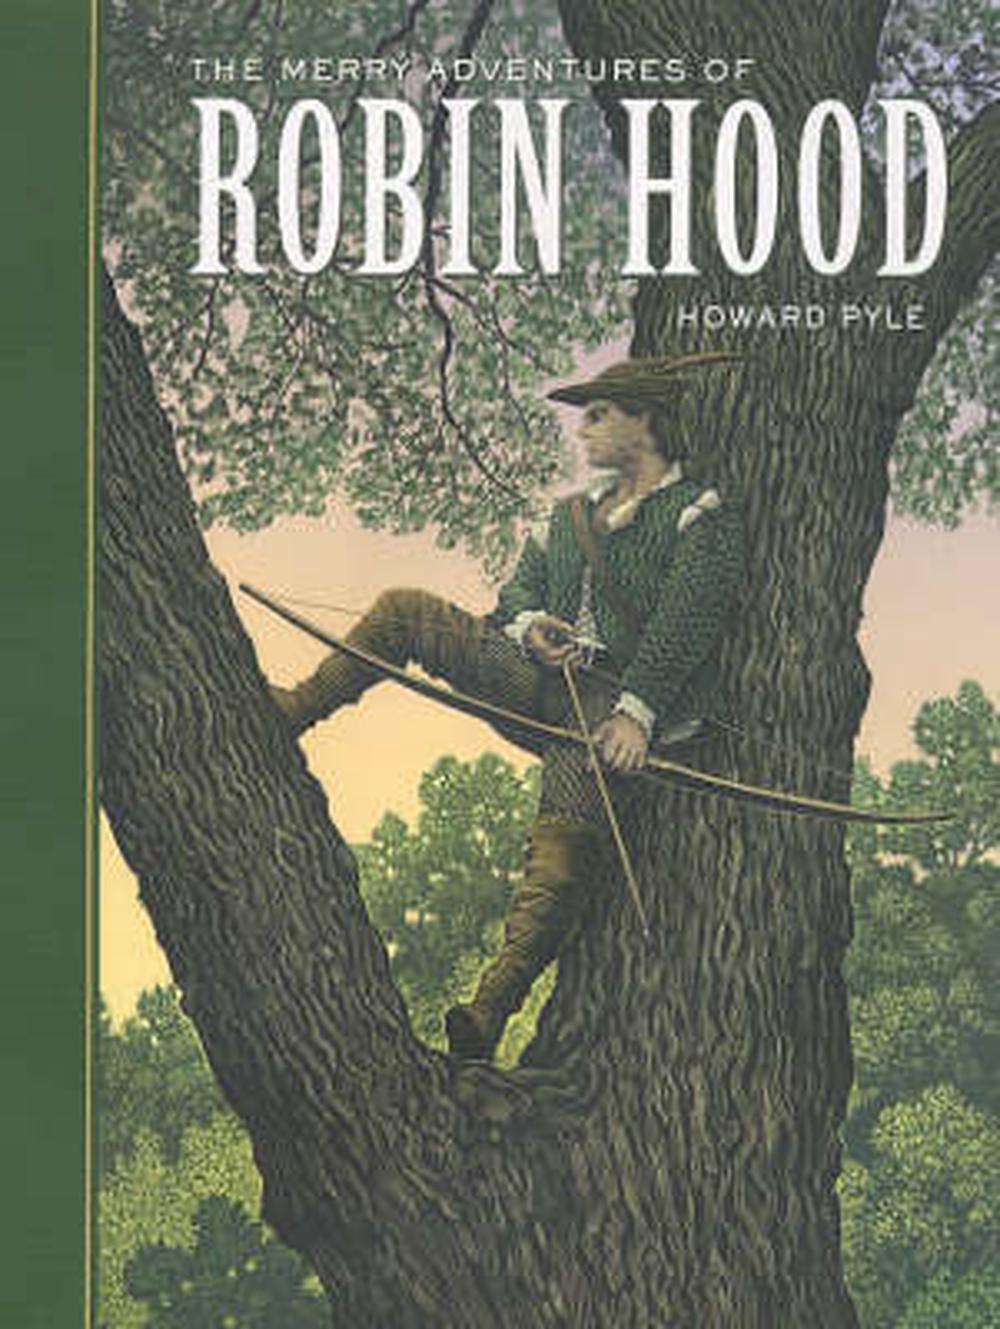 the merry adventures of robin hood sparknotes